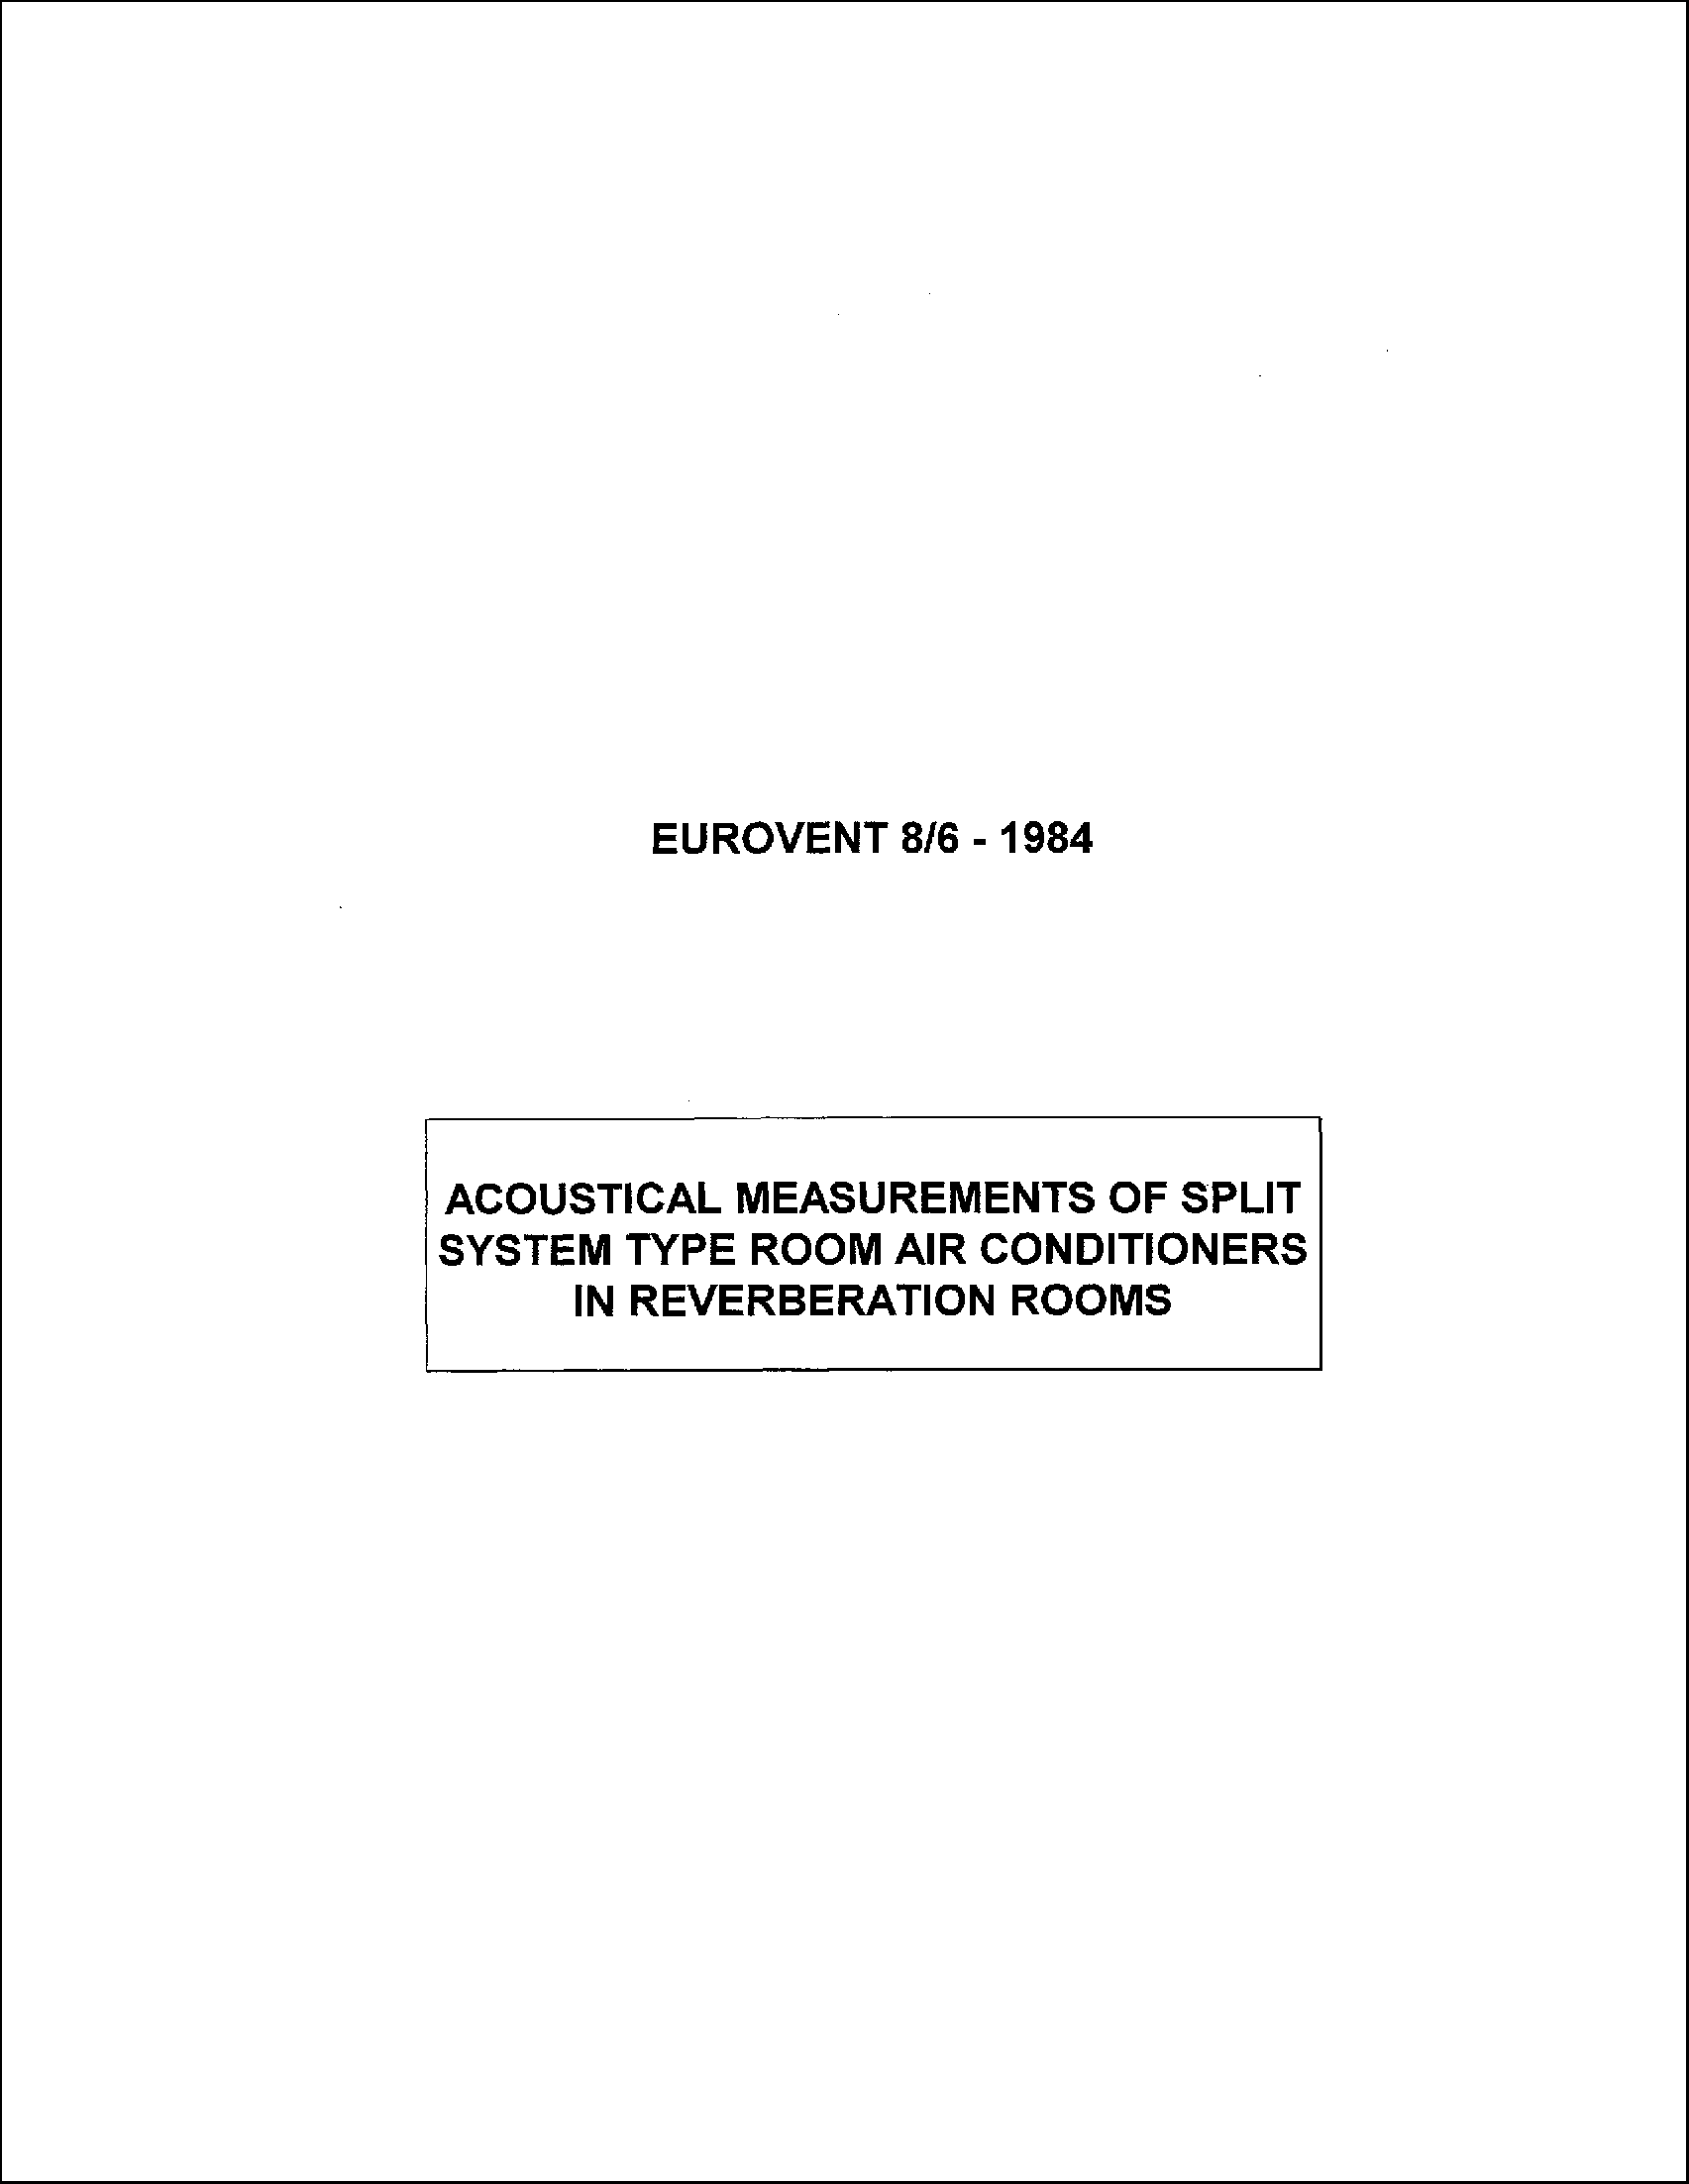 1984 - Acoustical measurements of split system type room air conditioners in reverberation rooms